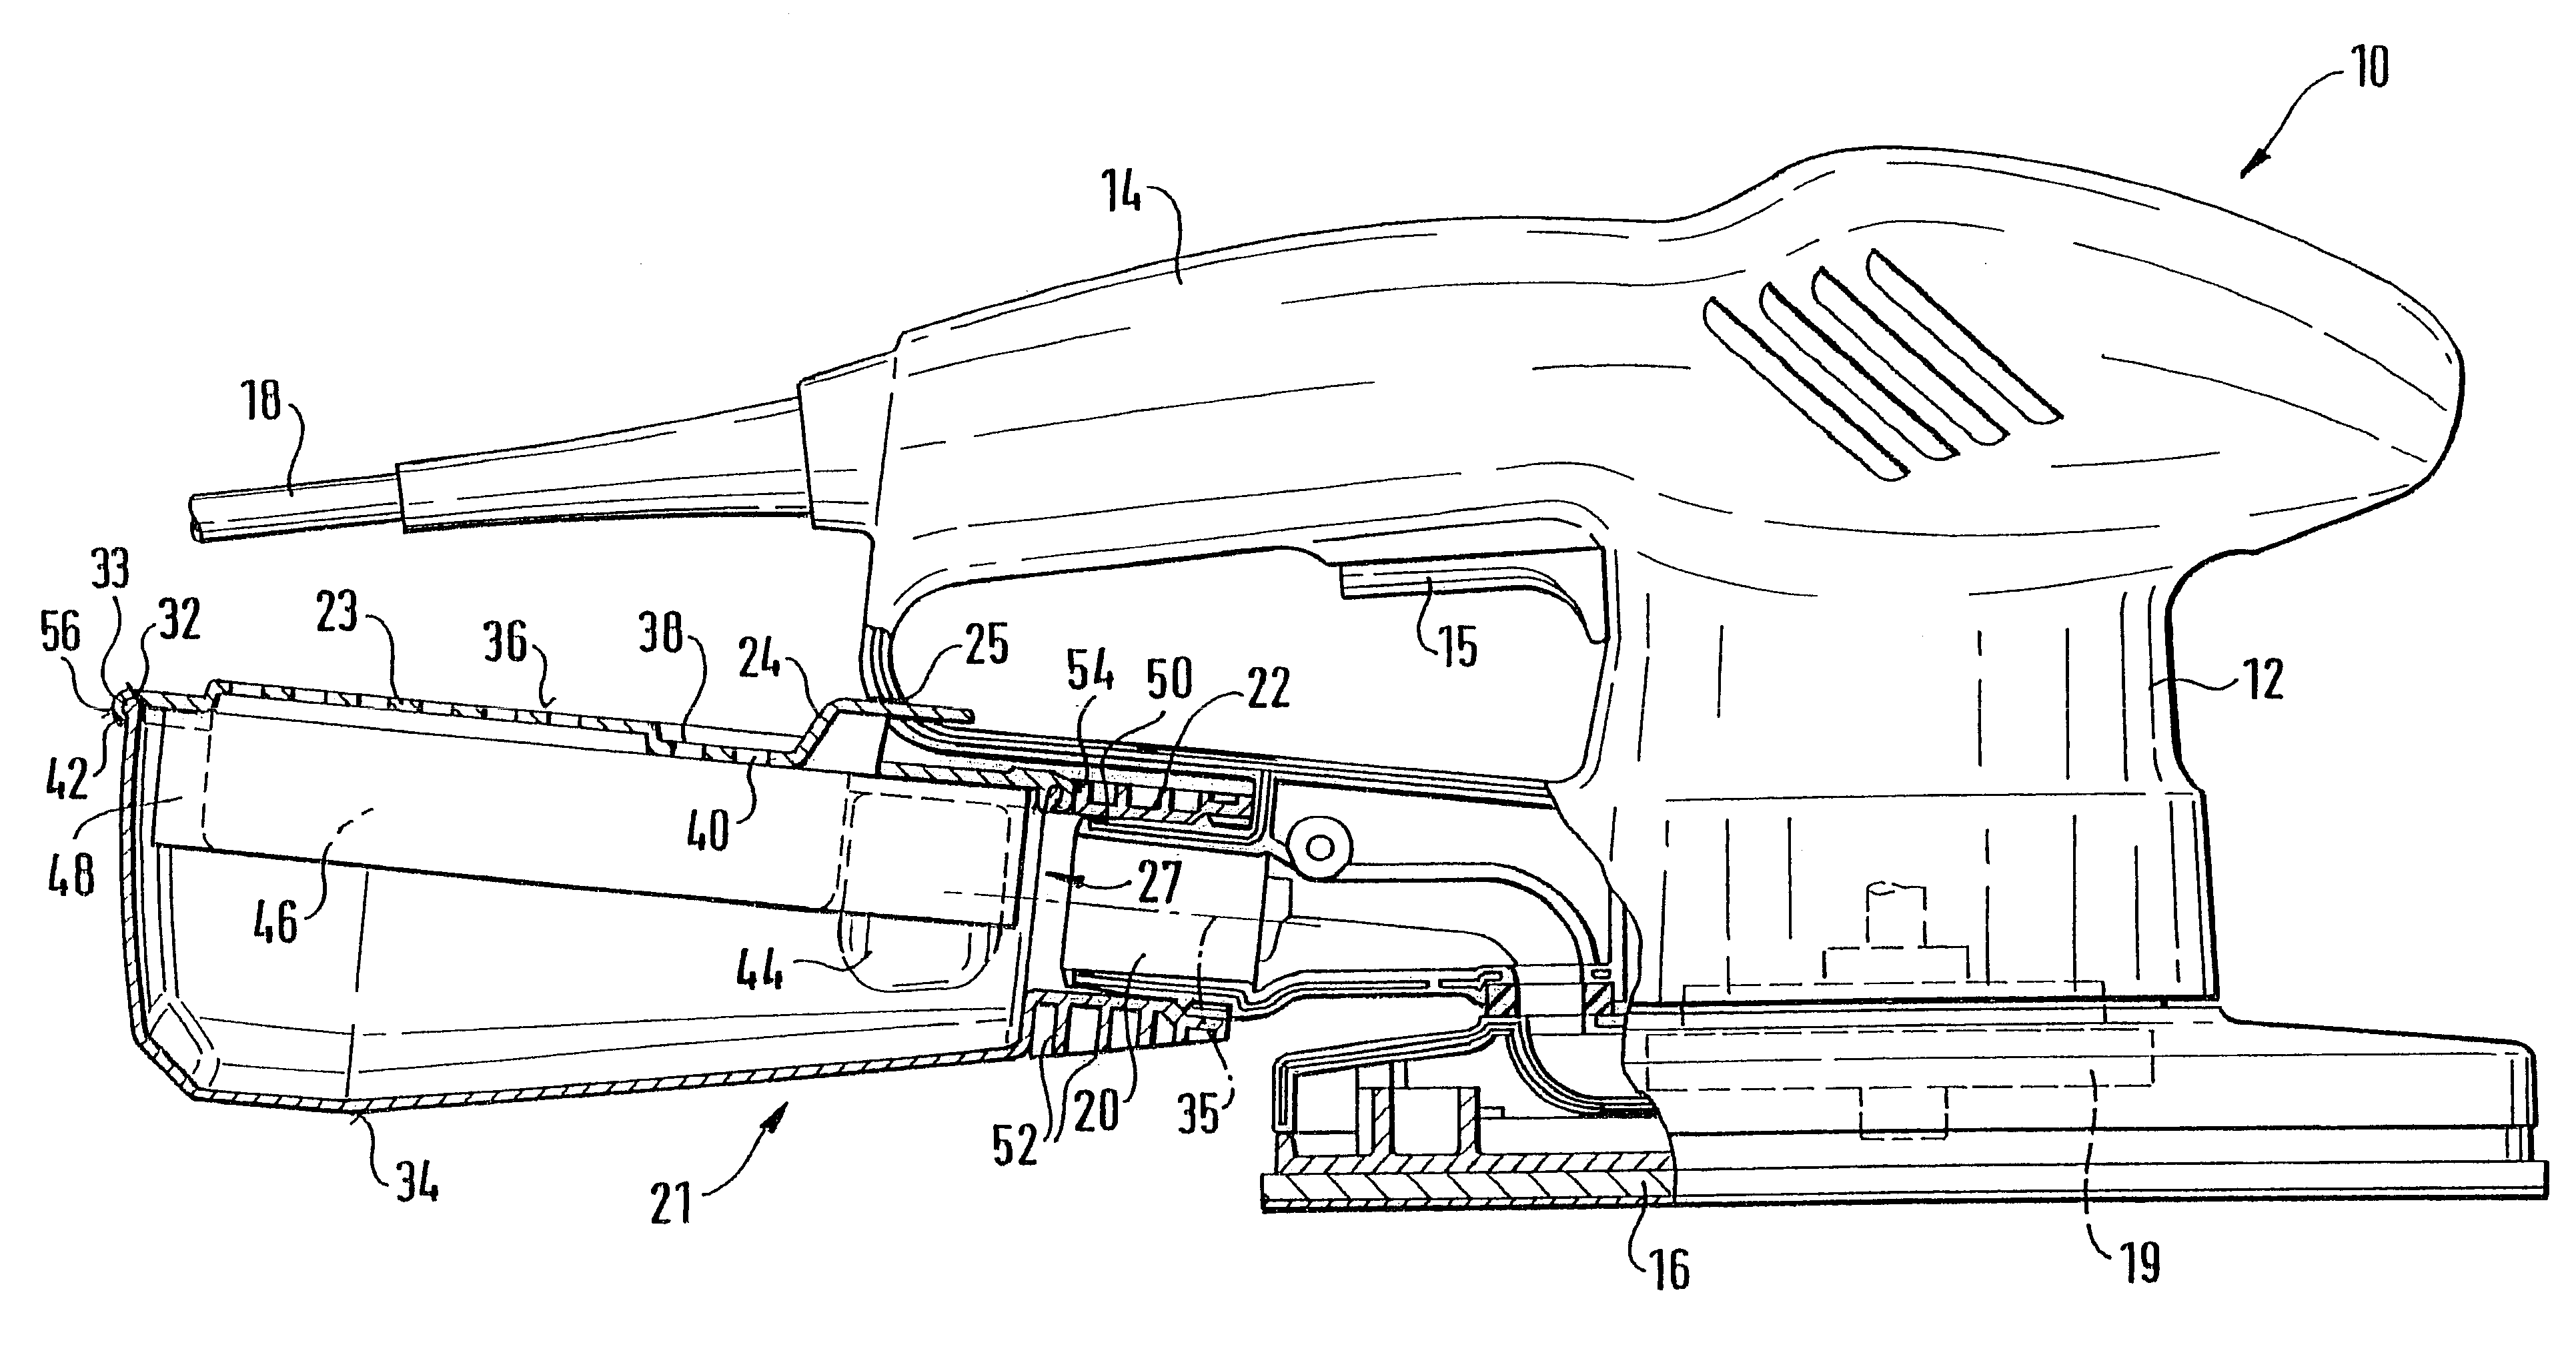 Hand-held machine tool with dust extraction